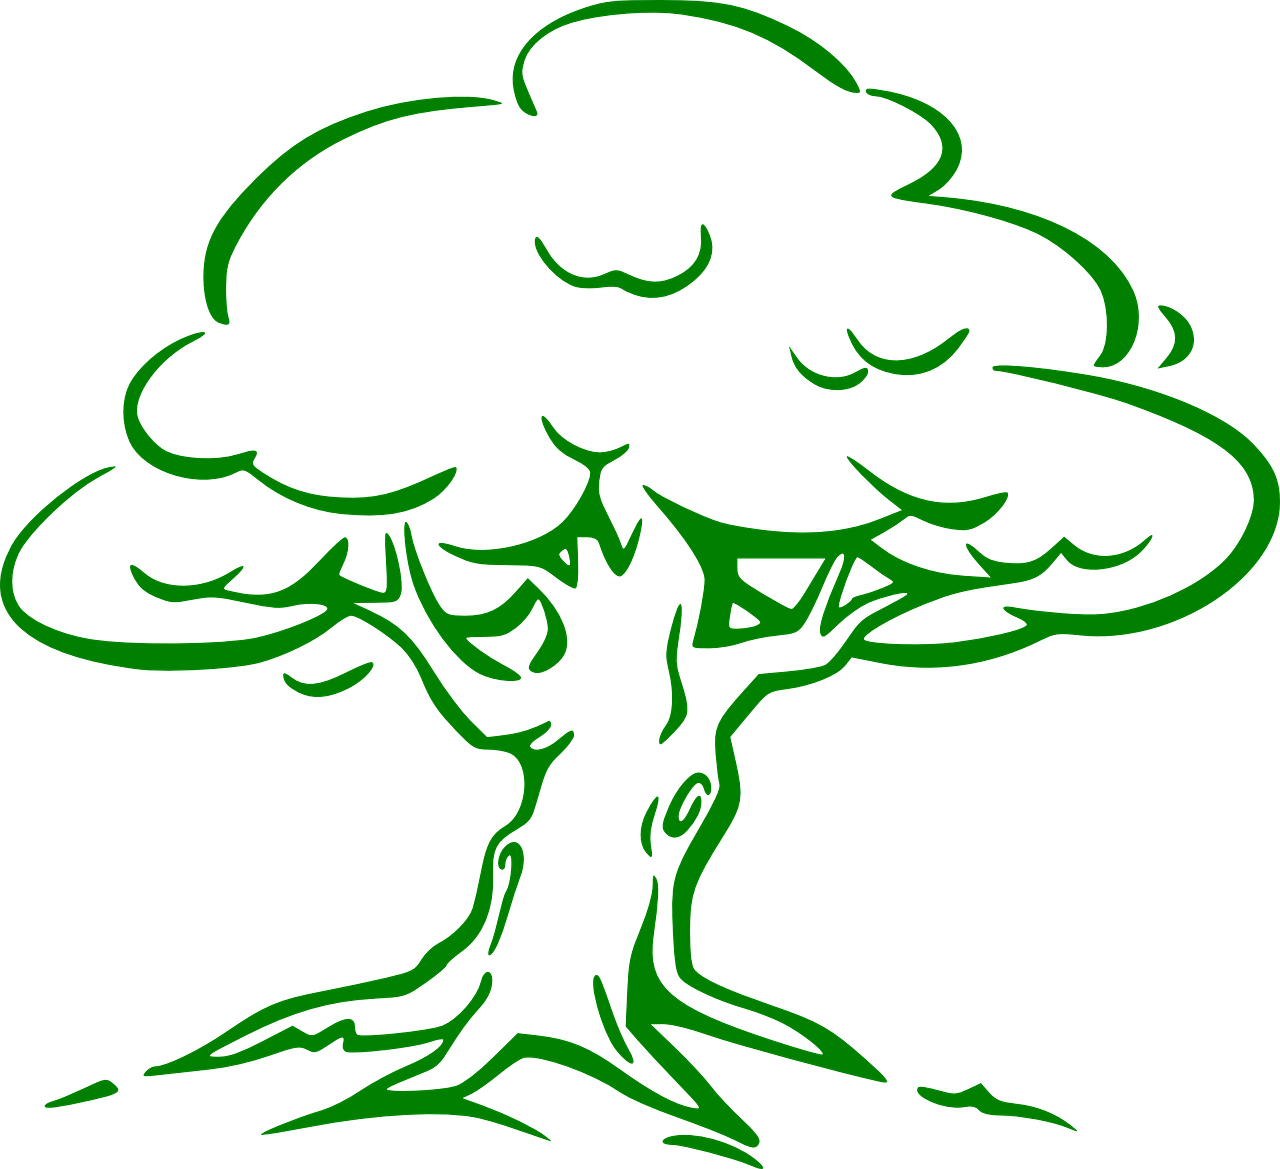 Clipart forest oak tree. Green nature eco